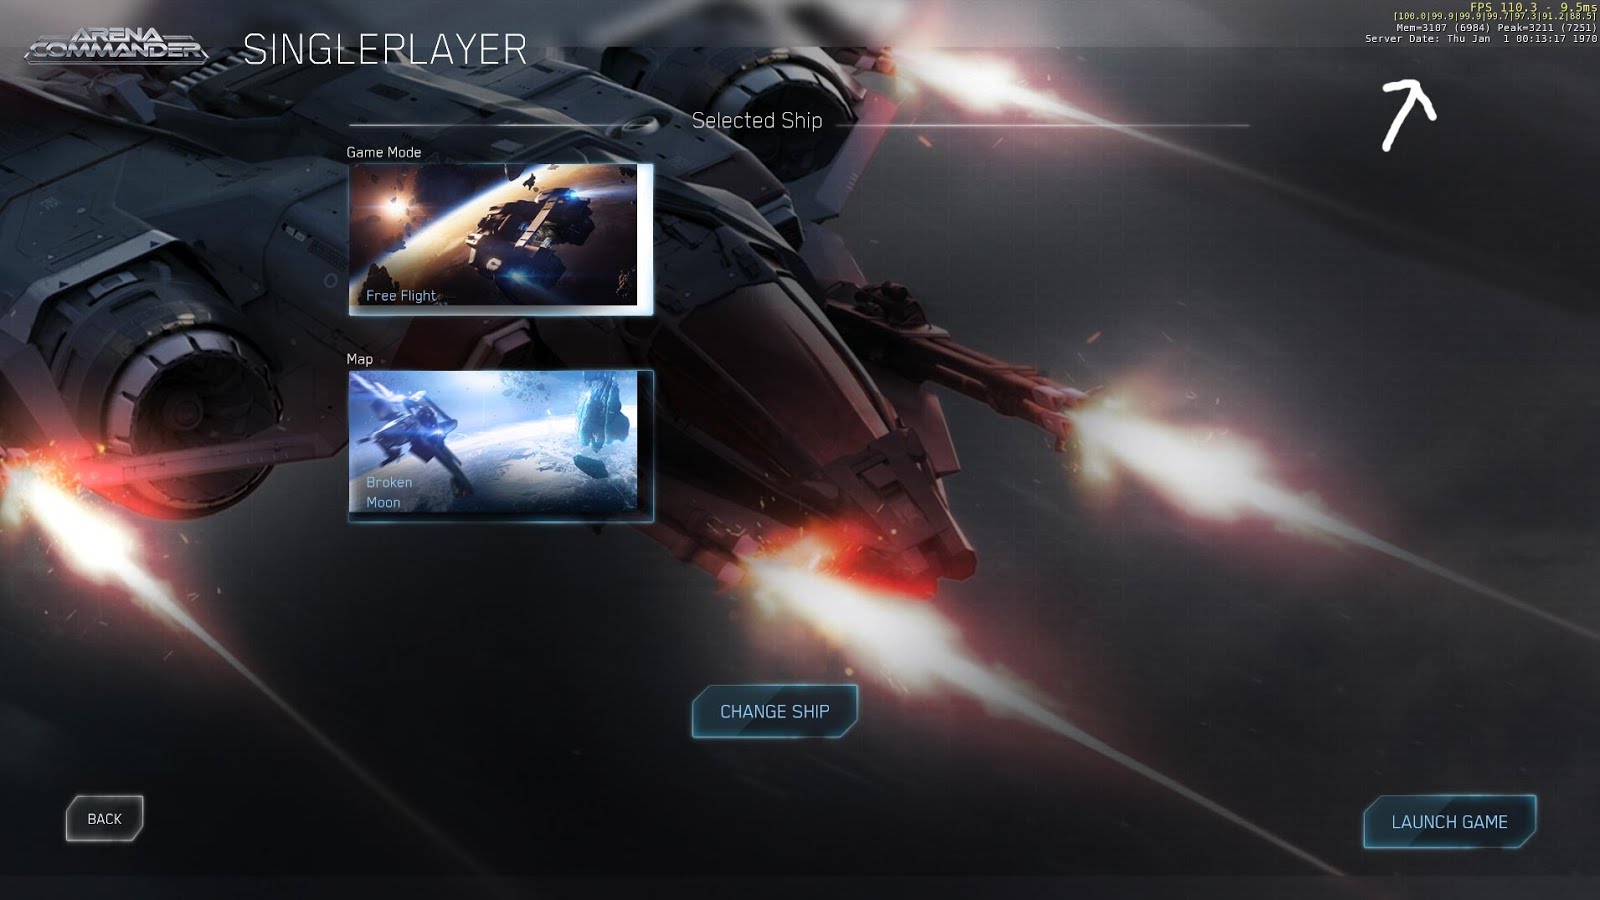 New Details Emerge on Star Citizen's FPS Gameplay - mxdwn Games